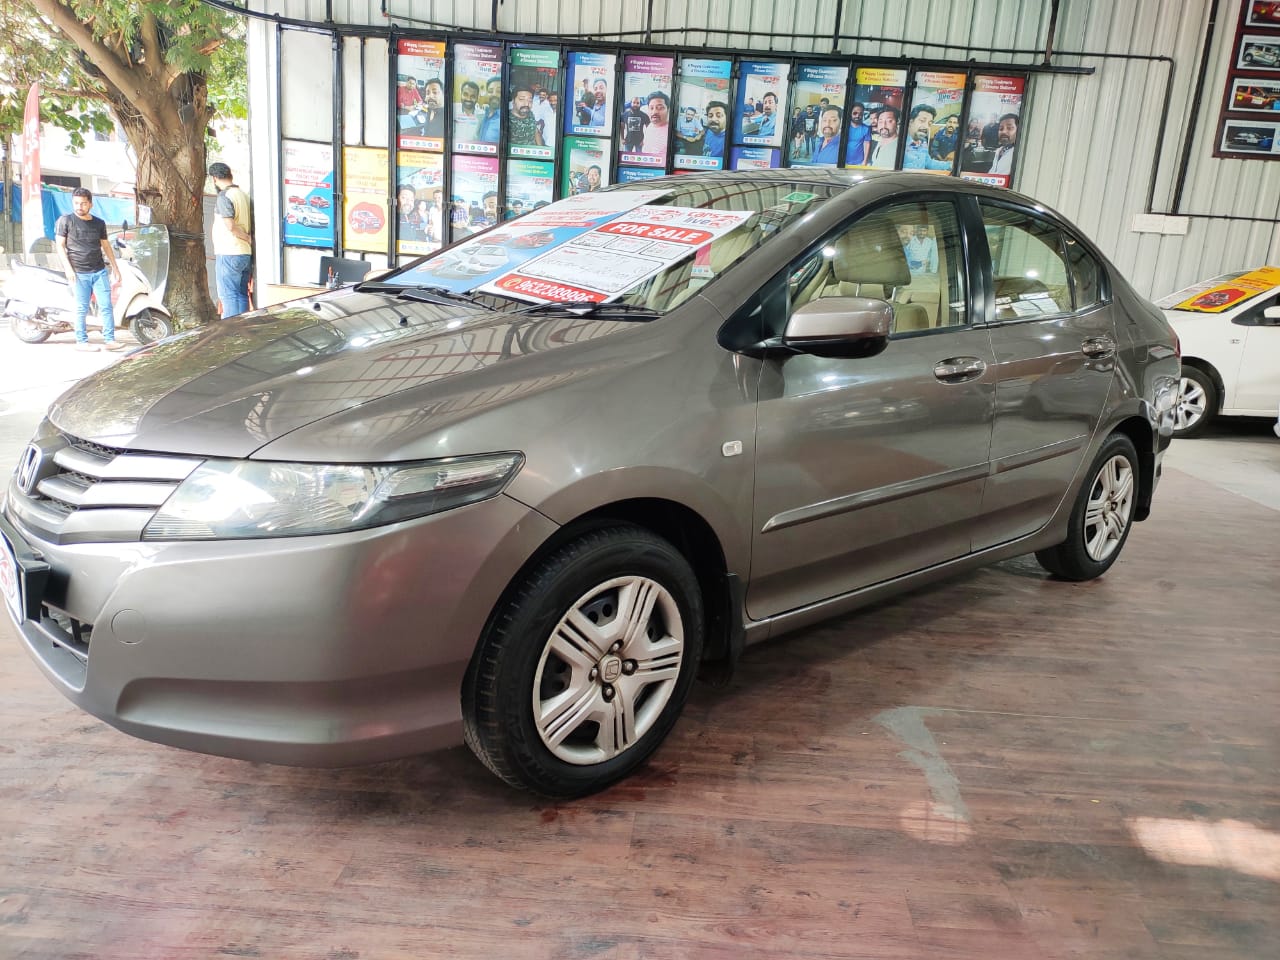 Honda City iVtec SMT 2011 Petrol With Dual Airbags + Warranty one Year Free - CarsLive.in